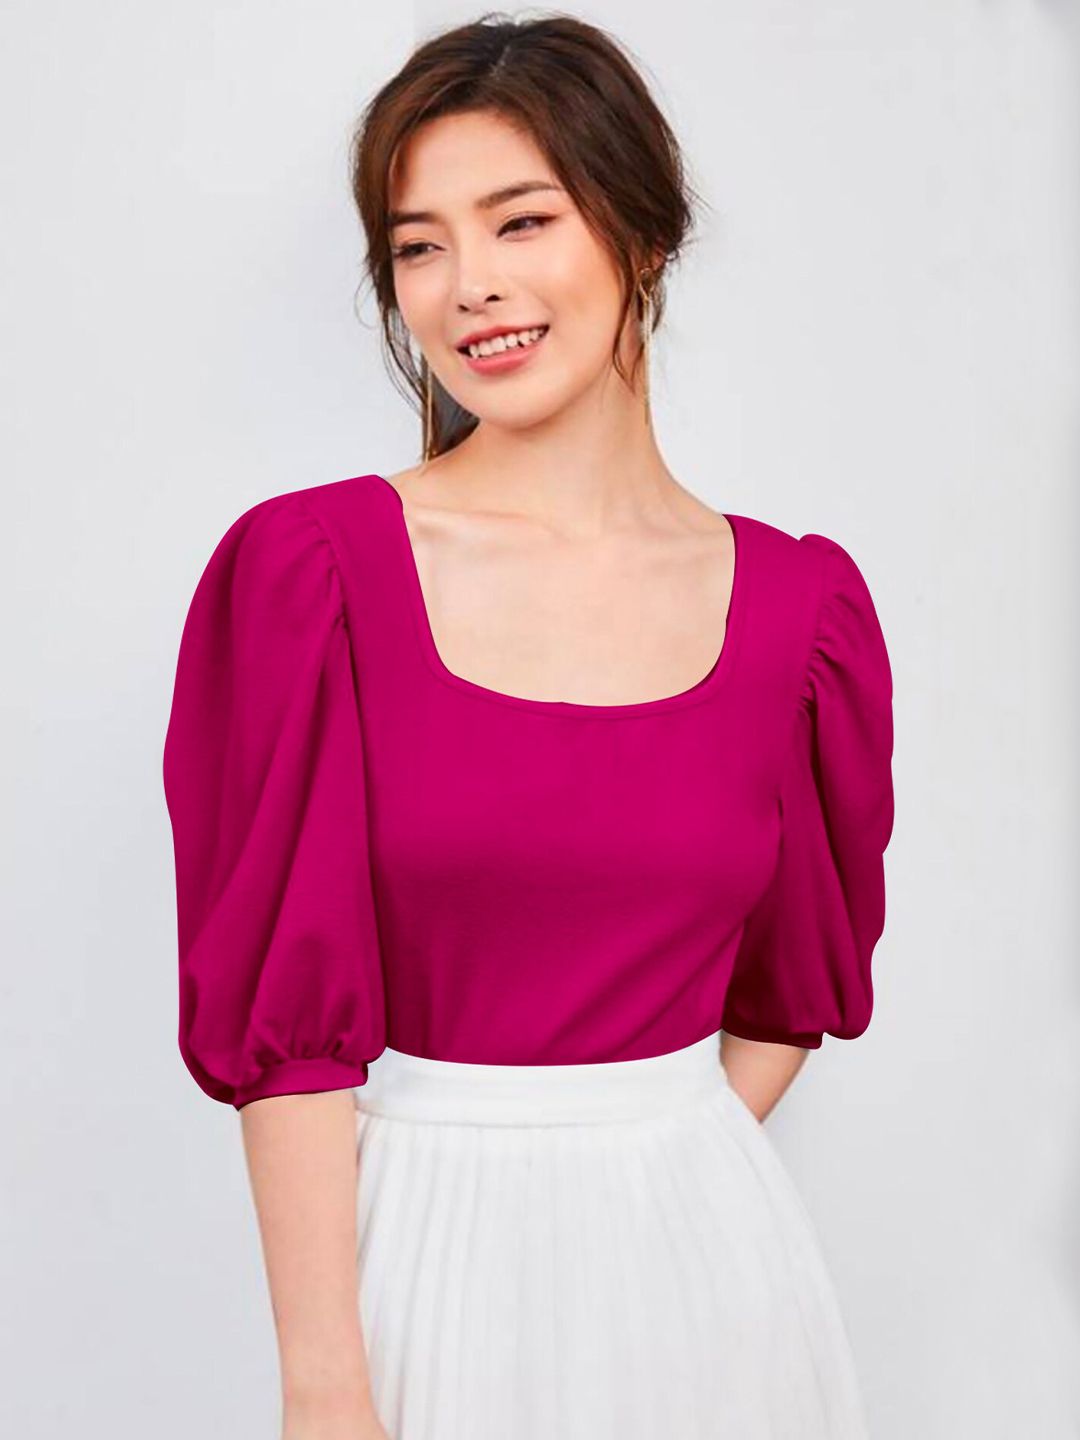 Dream Beauty Fashion Scoop Neck Puff Sleeves Top Price in India